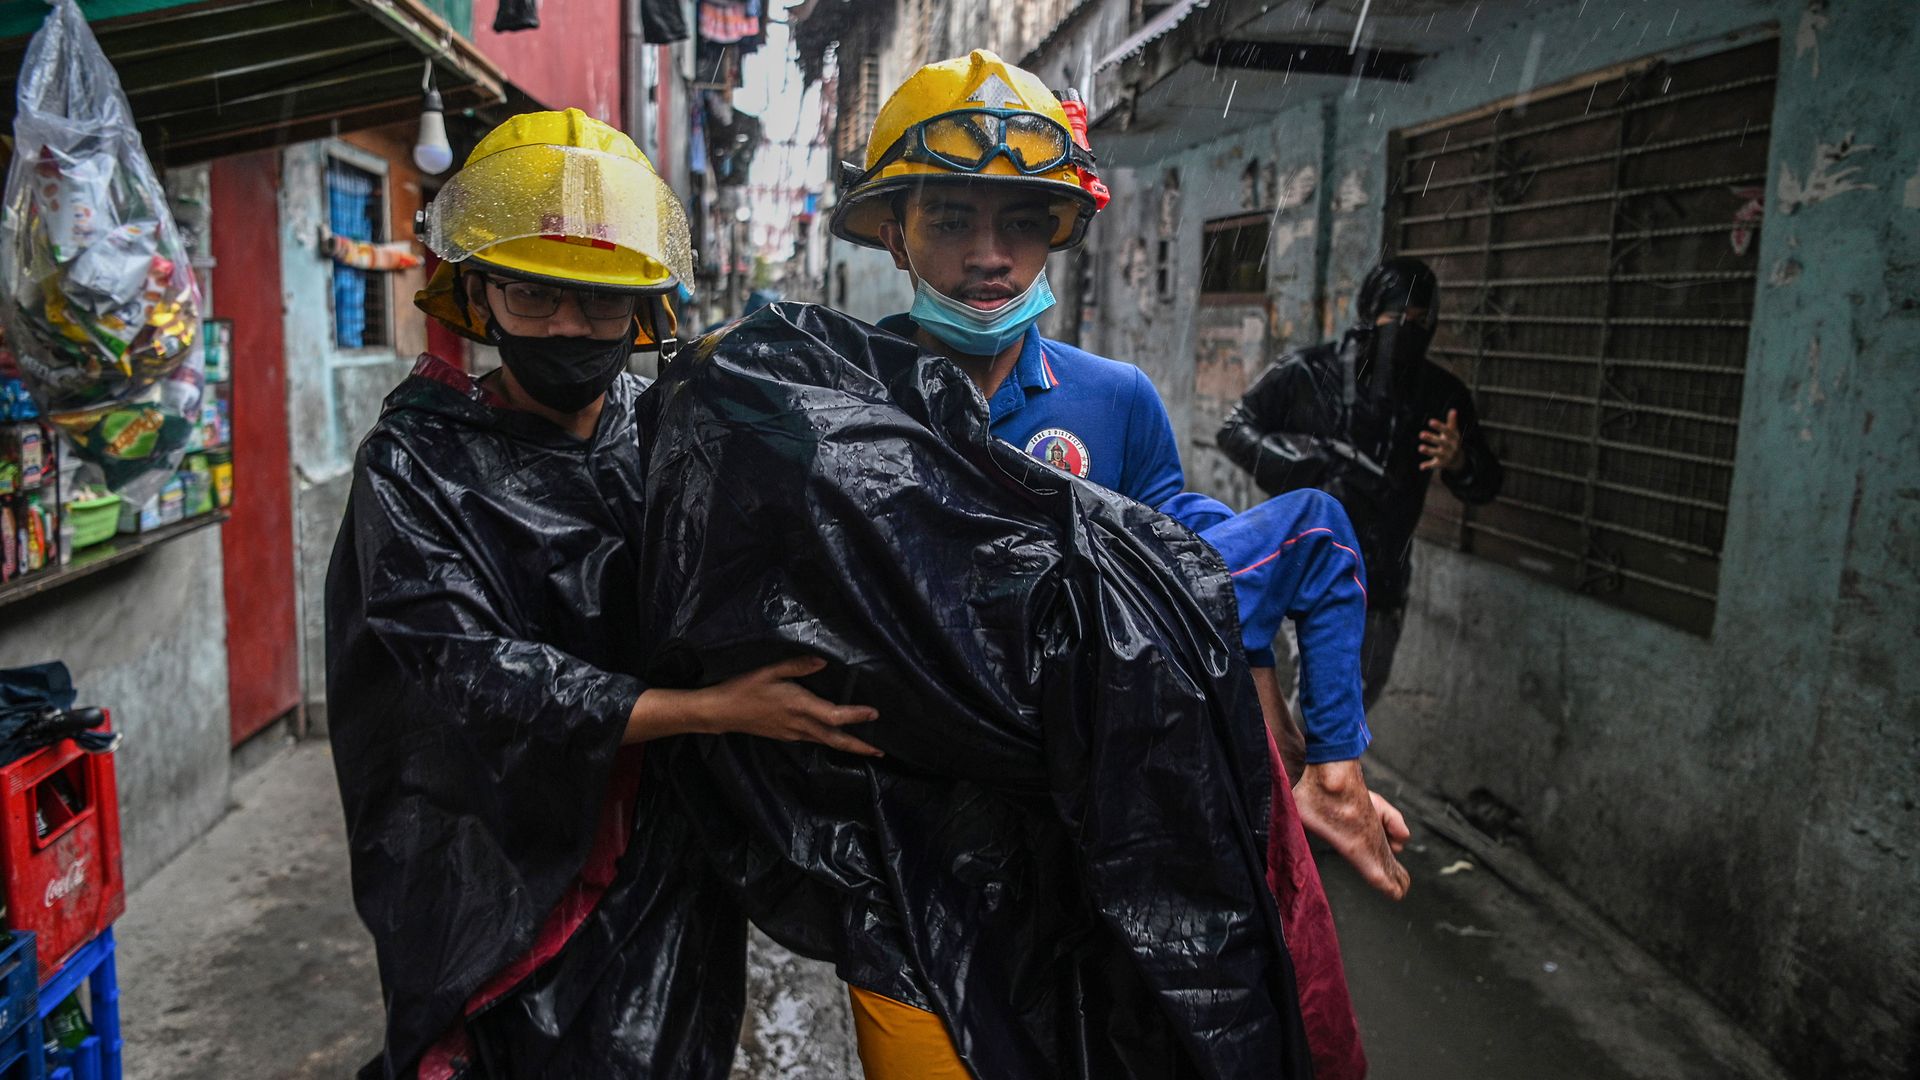  Rescue workers carry a child to a waiting vehicle during an evacuation of informal settlers living along coastal areas in Manila on November 1